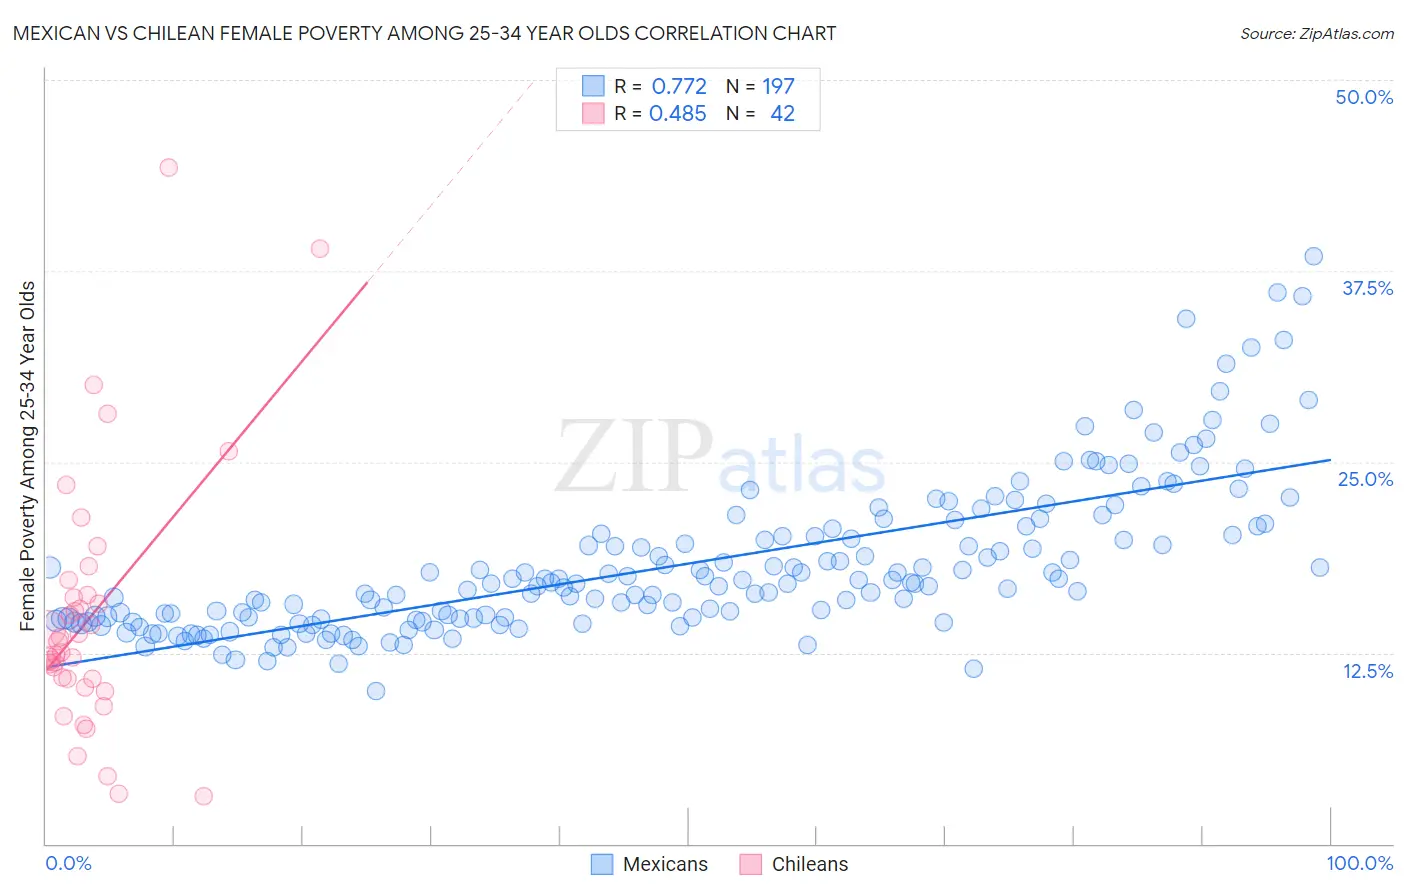 Mexican vs Chilean Female Poverty Among 25-34 Year Olds